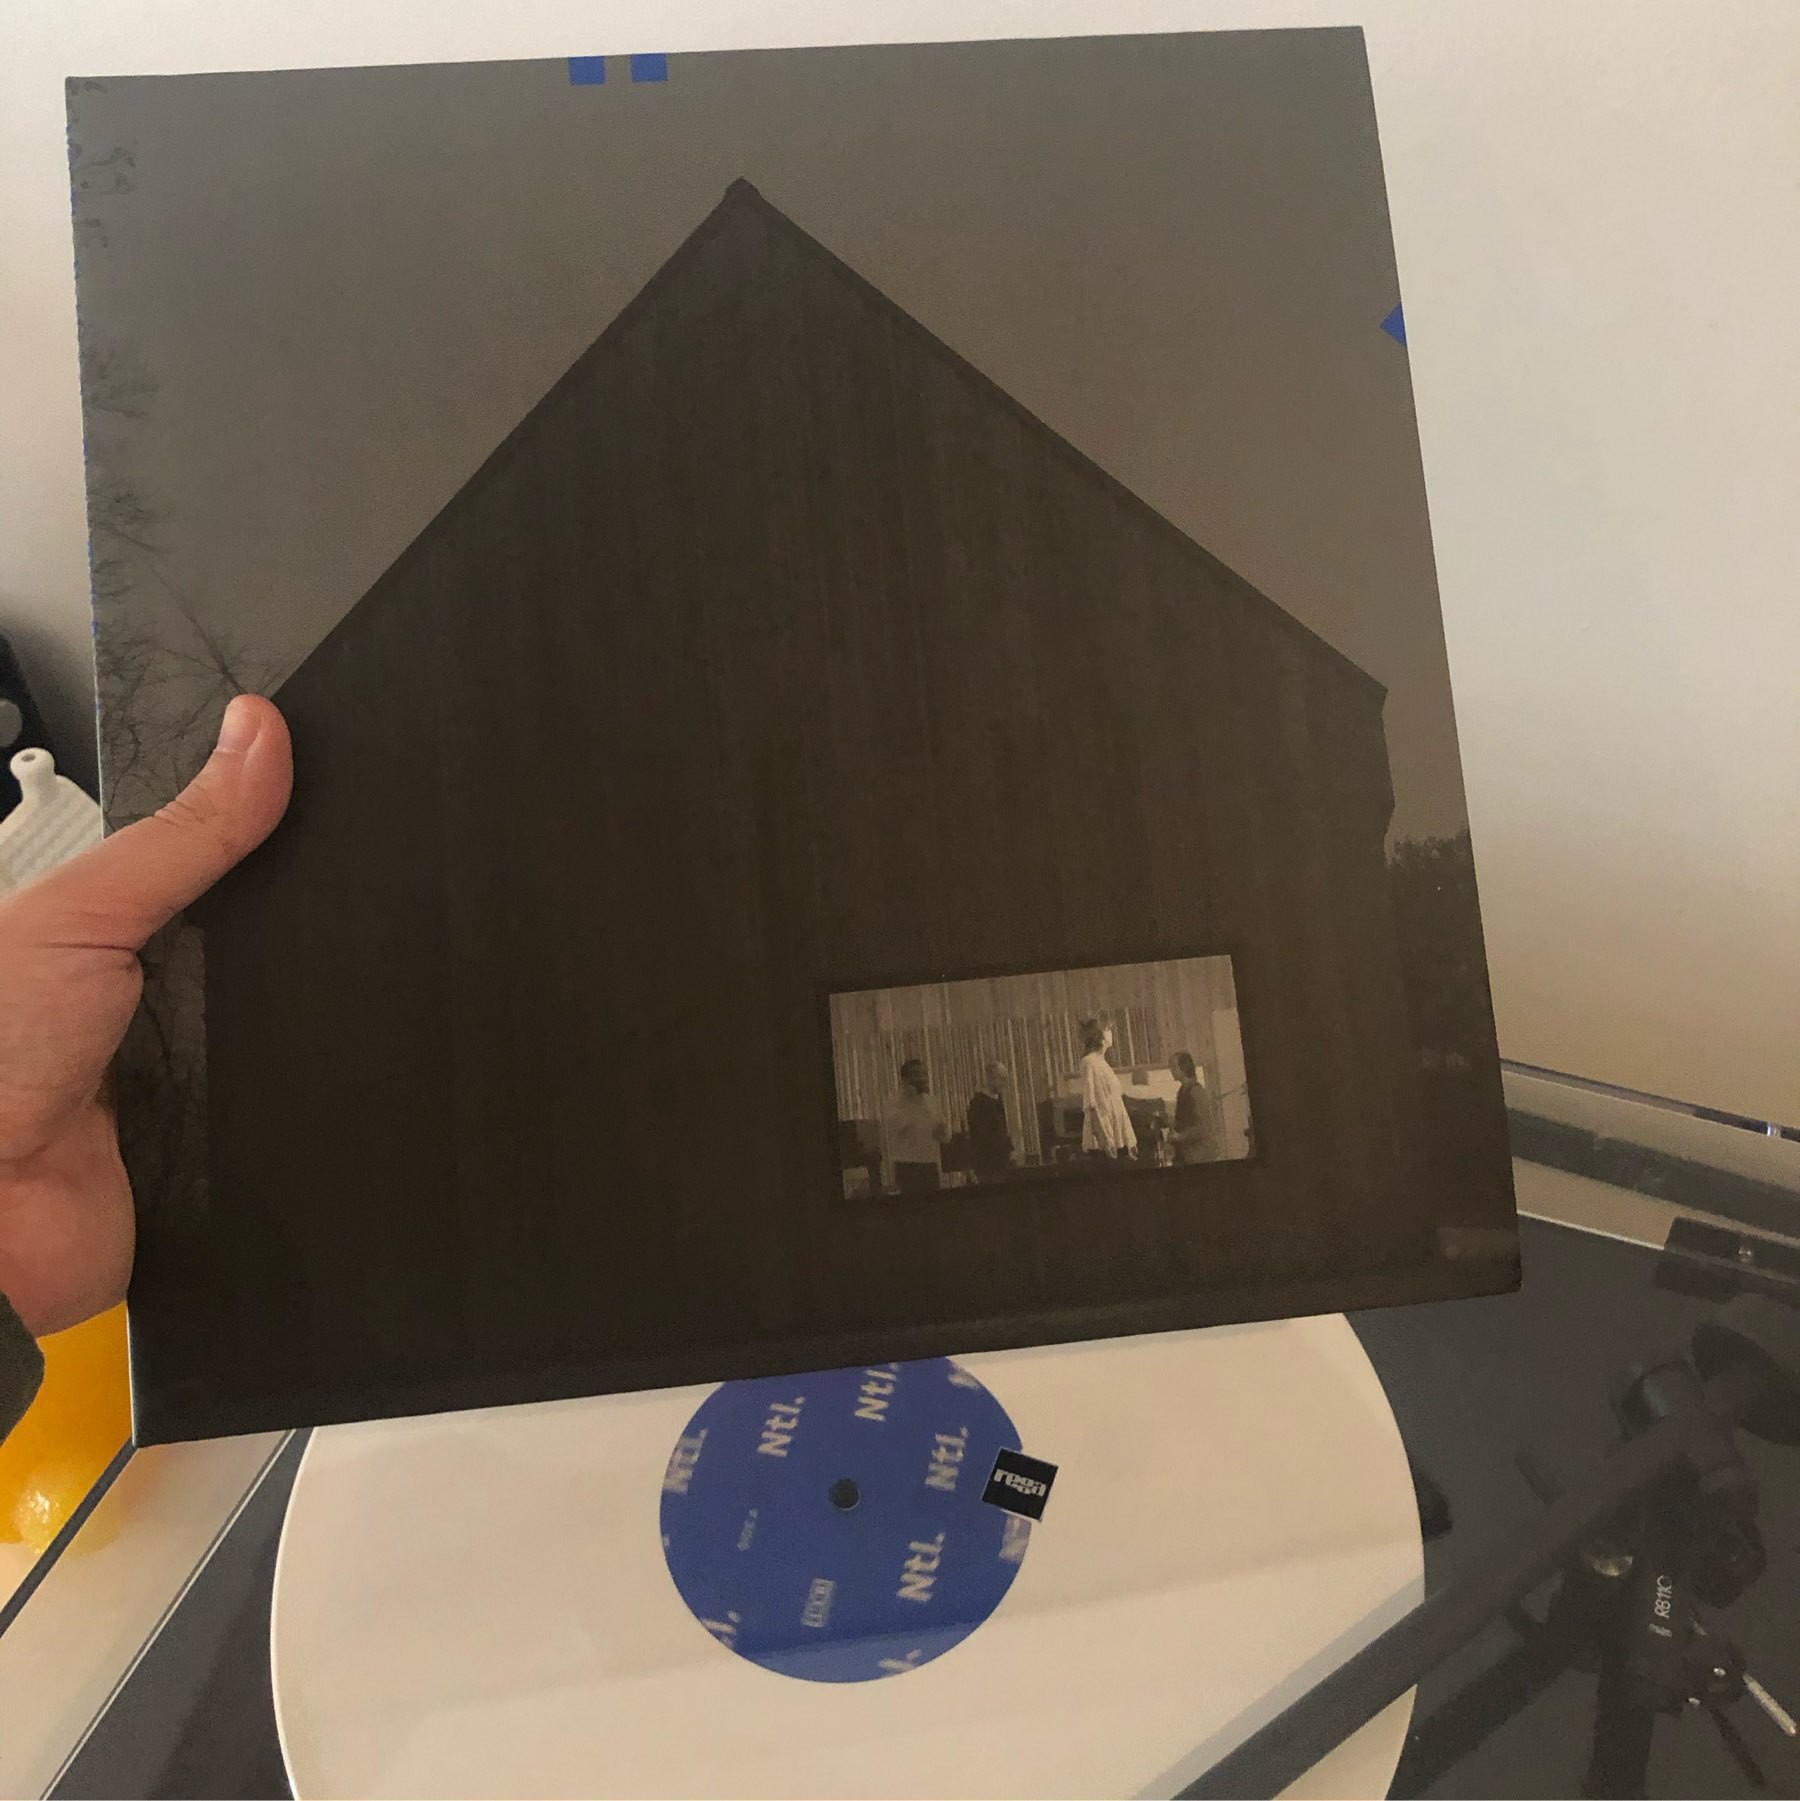 Record playing, showing cover which is a dark house with the view of the living room.